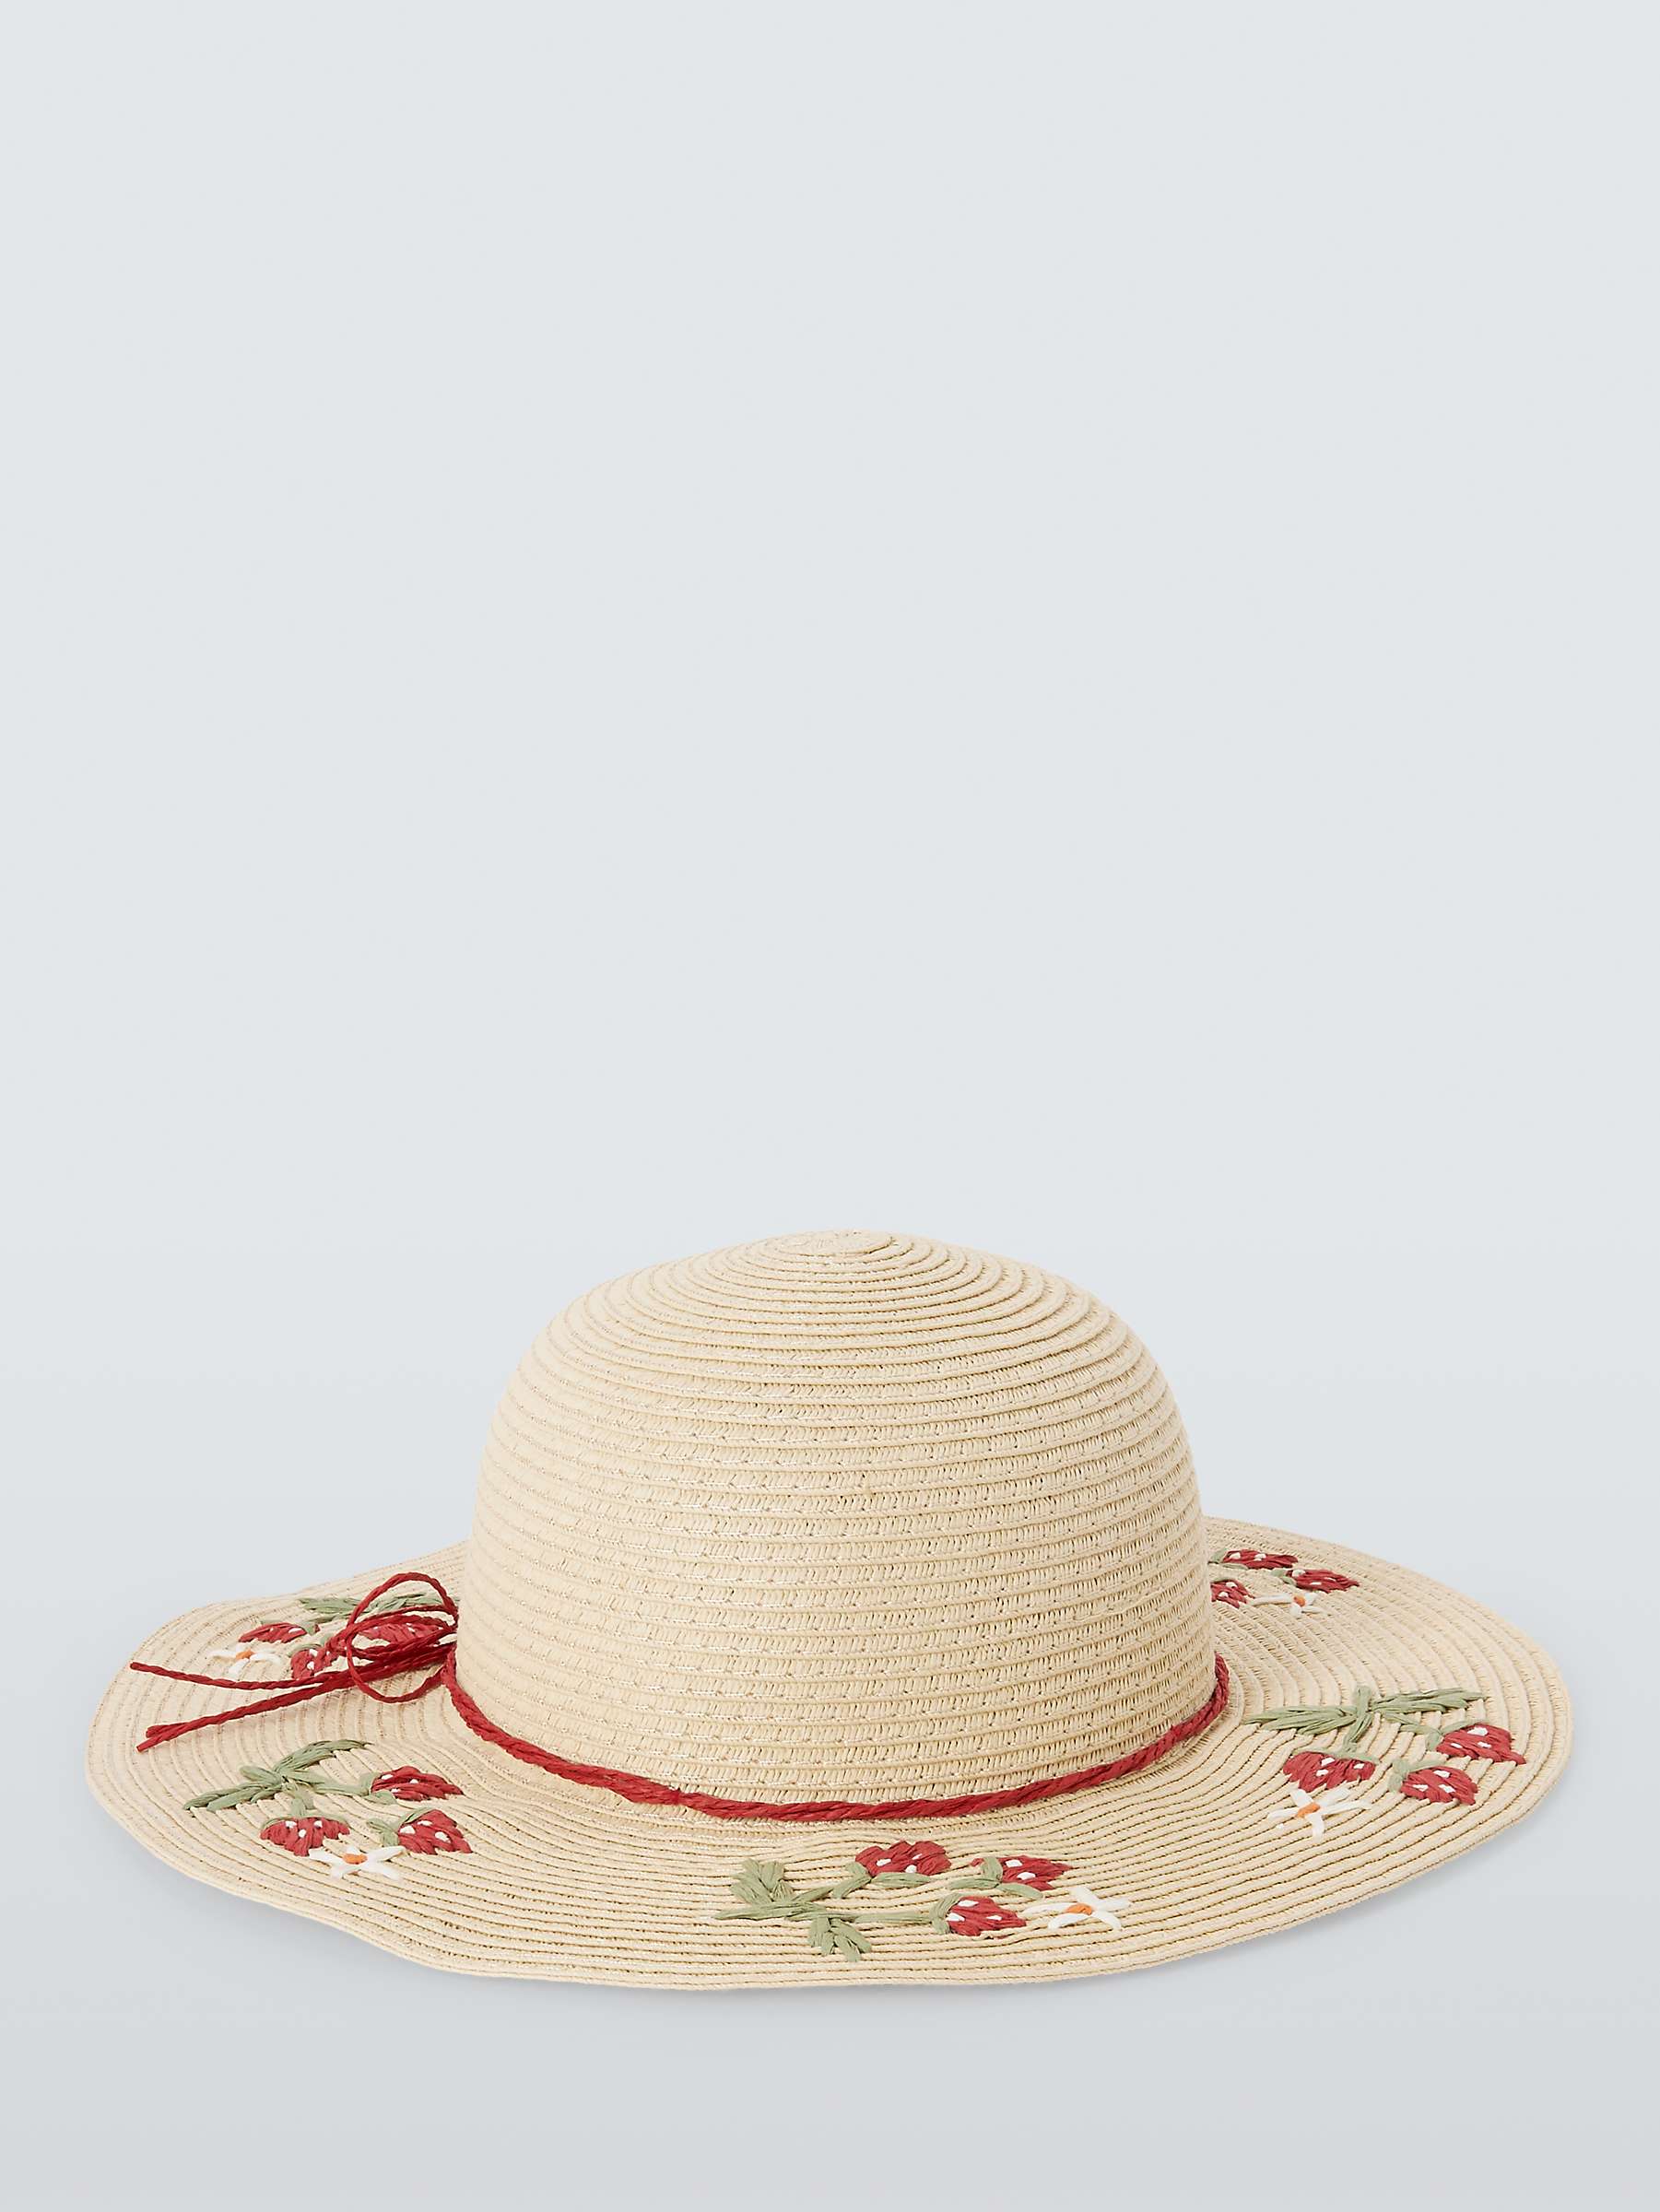 Buy John Lewis Kids' Embroided Strawberry Straw Hat, Neutral Online at johnlewis.com